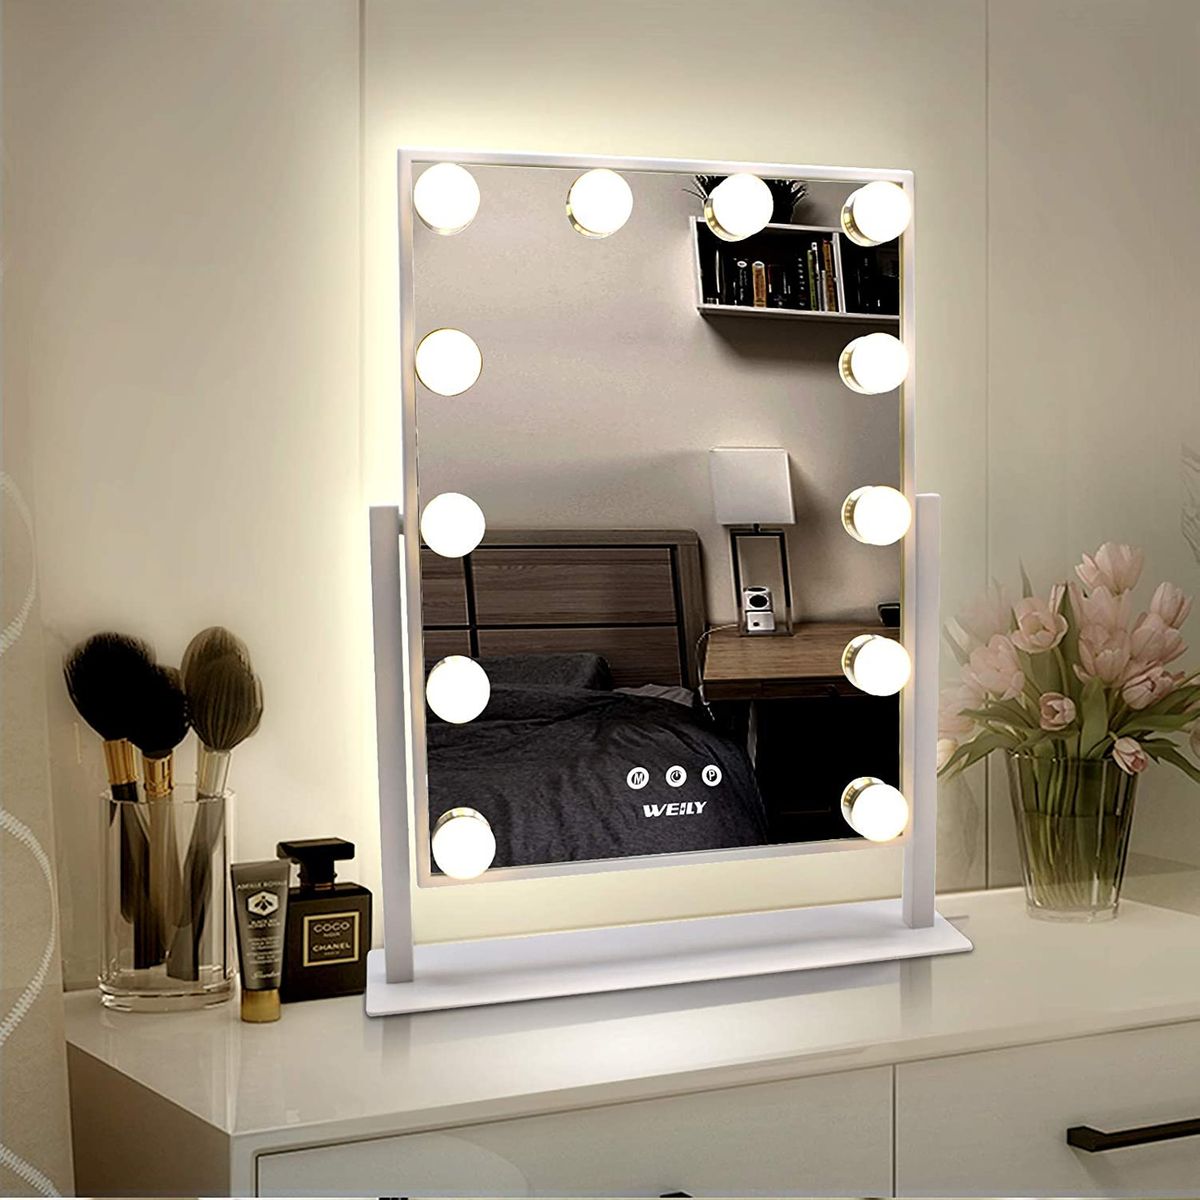 14 Best Lighted Makeup Mirrors 2021, Long Wall Mirror With Lights